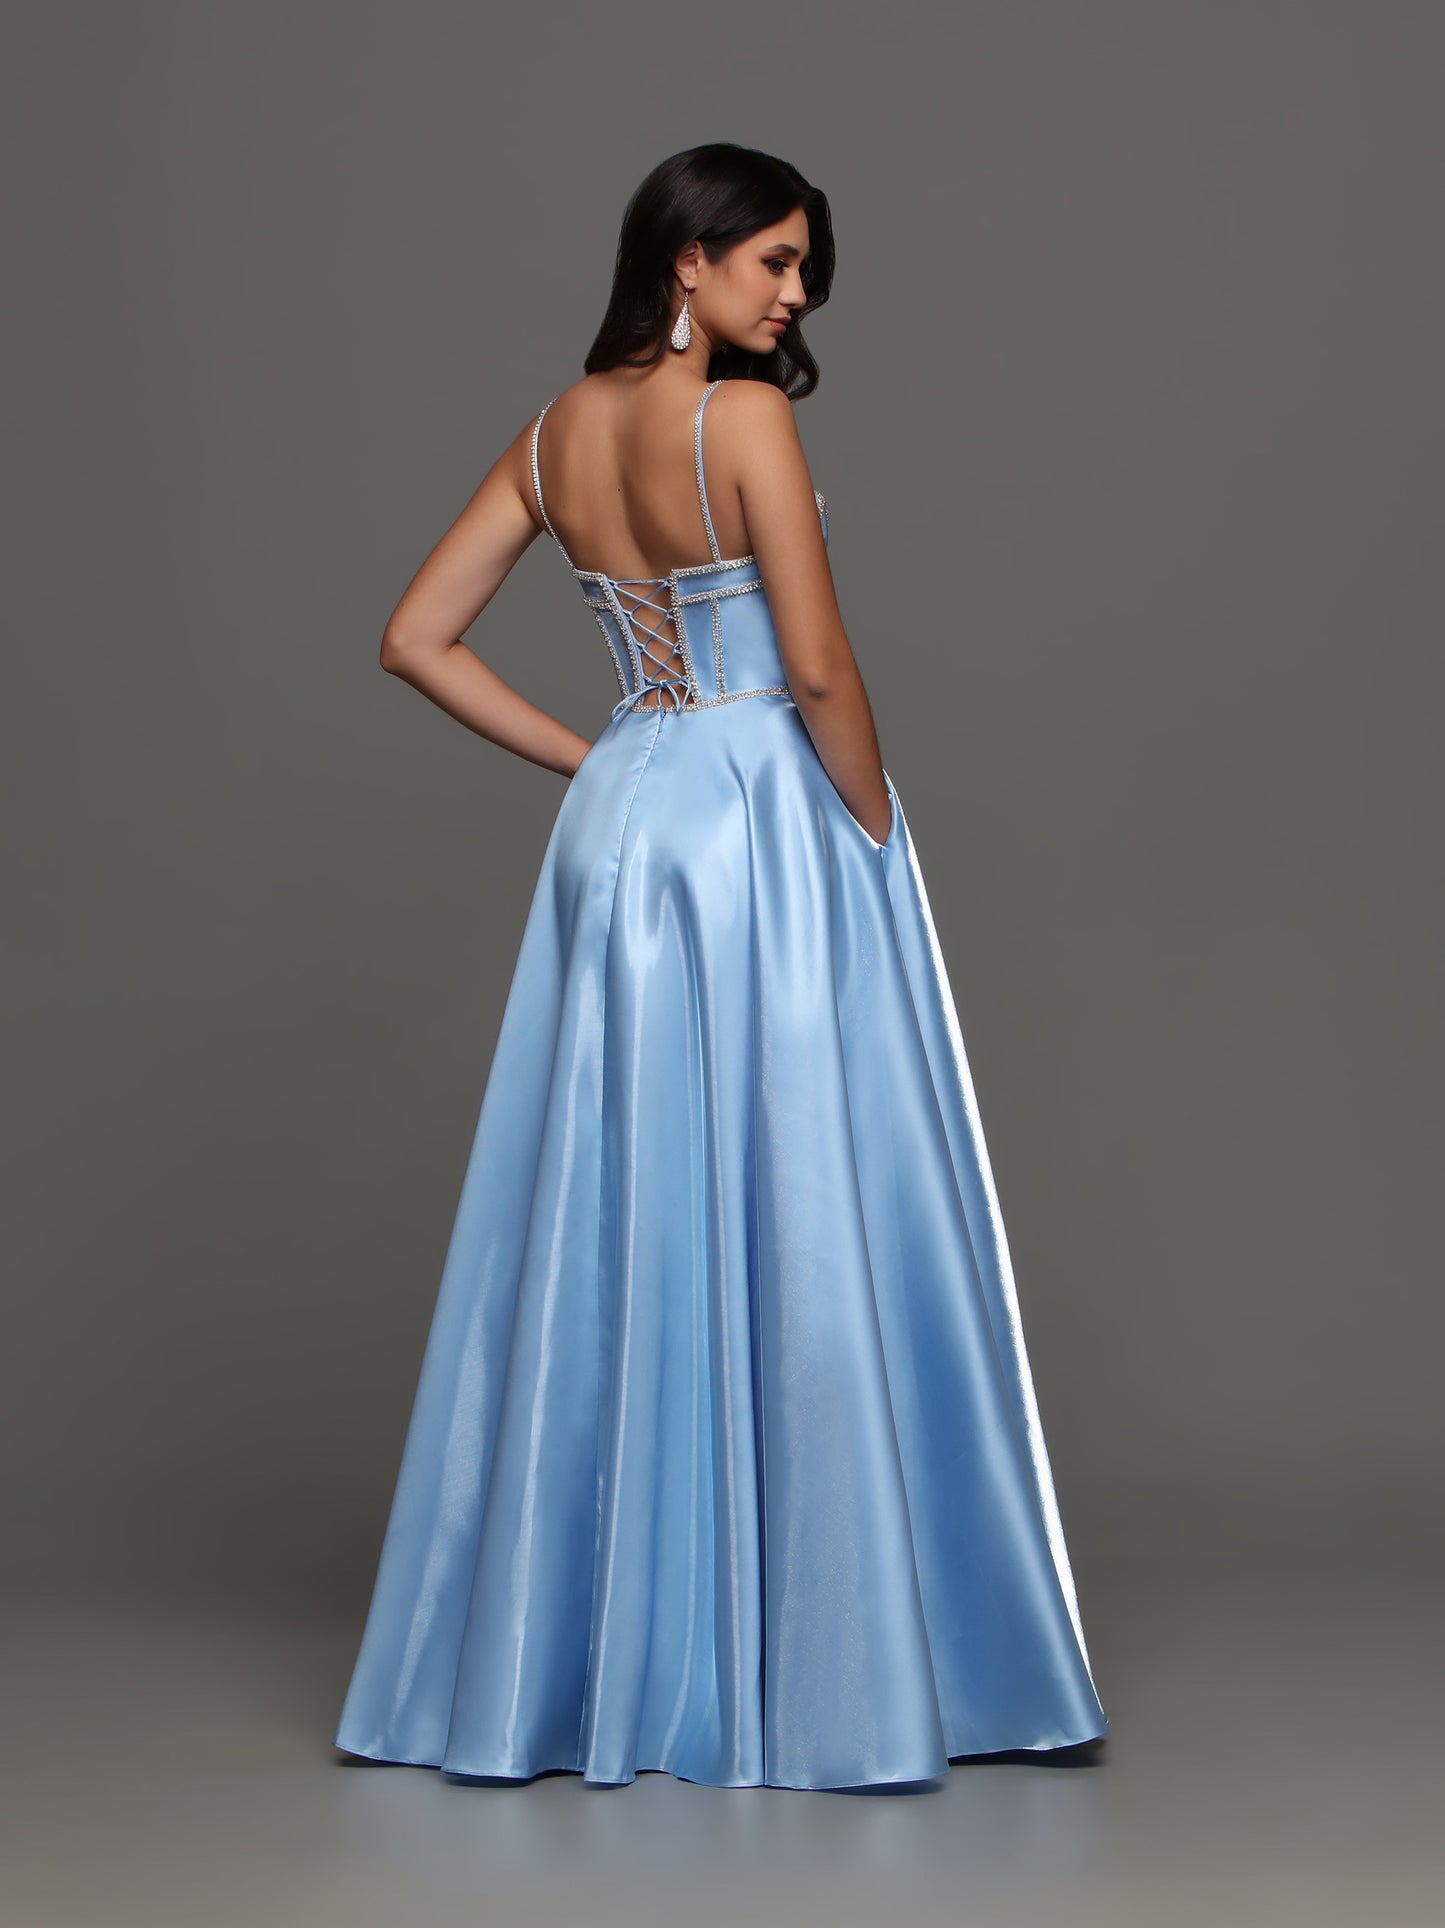 Experience elegance and glamour with the Candice Wang 72398 A Line Satin Maxi Slit Ballgown. The corset top features intricate crystal detailing, while the flowing satin skirt boasts a thigh-high slit. This dress is perfect for prom, formal events, or any special occasion. Add a touch of luxury to your wardrobe. Pockets  Sizes: 0-16  Colors: Light Blue, Red